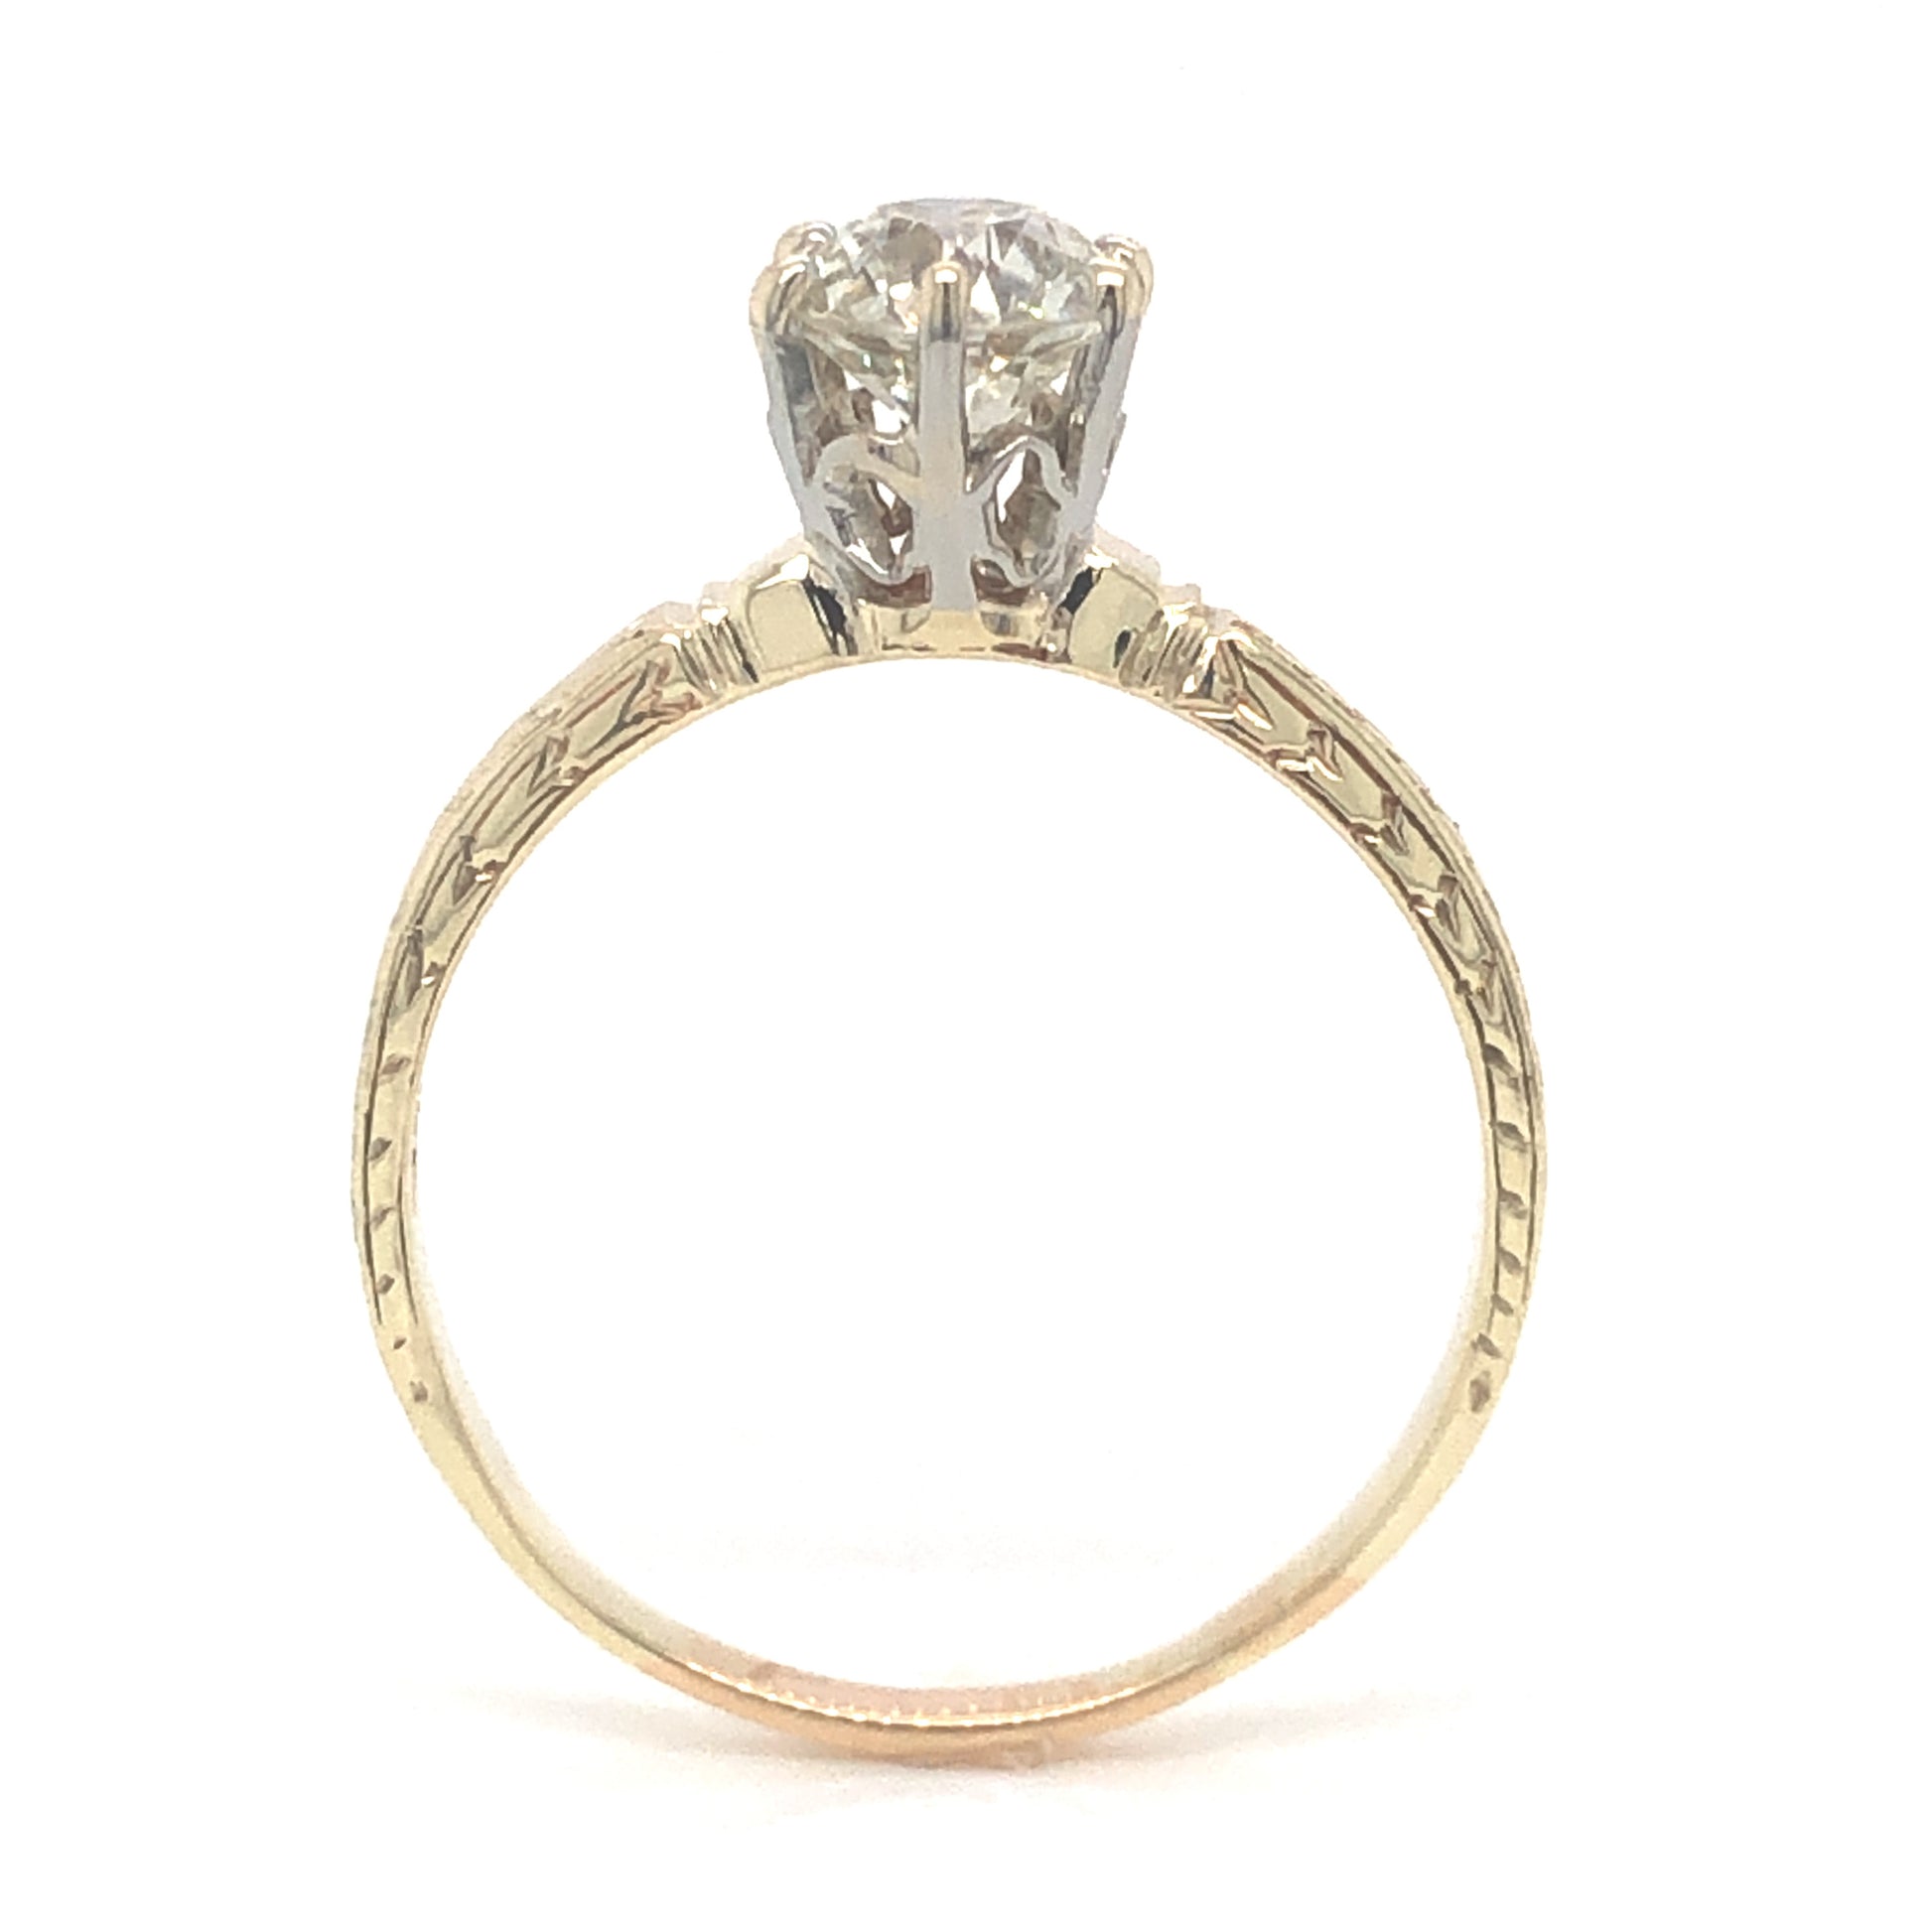 .77 Art Deco Solitaire Diamond Engagement Ring in 14k Yellow GoldComposition: Platinum Ring Size: 6.25 Total Diamond Weight: .77ct Total Gram Weight: 2.08 g Inscription: 14k
      